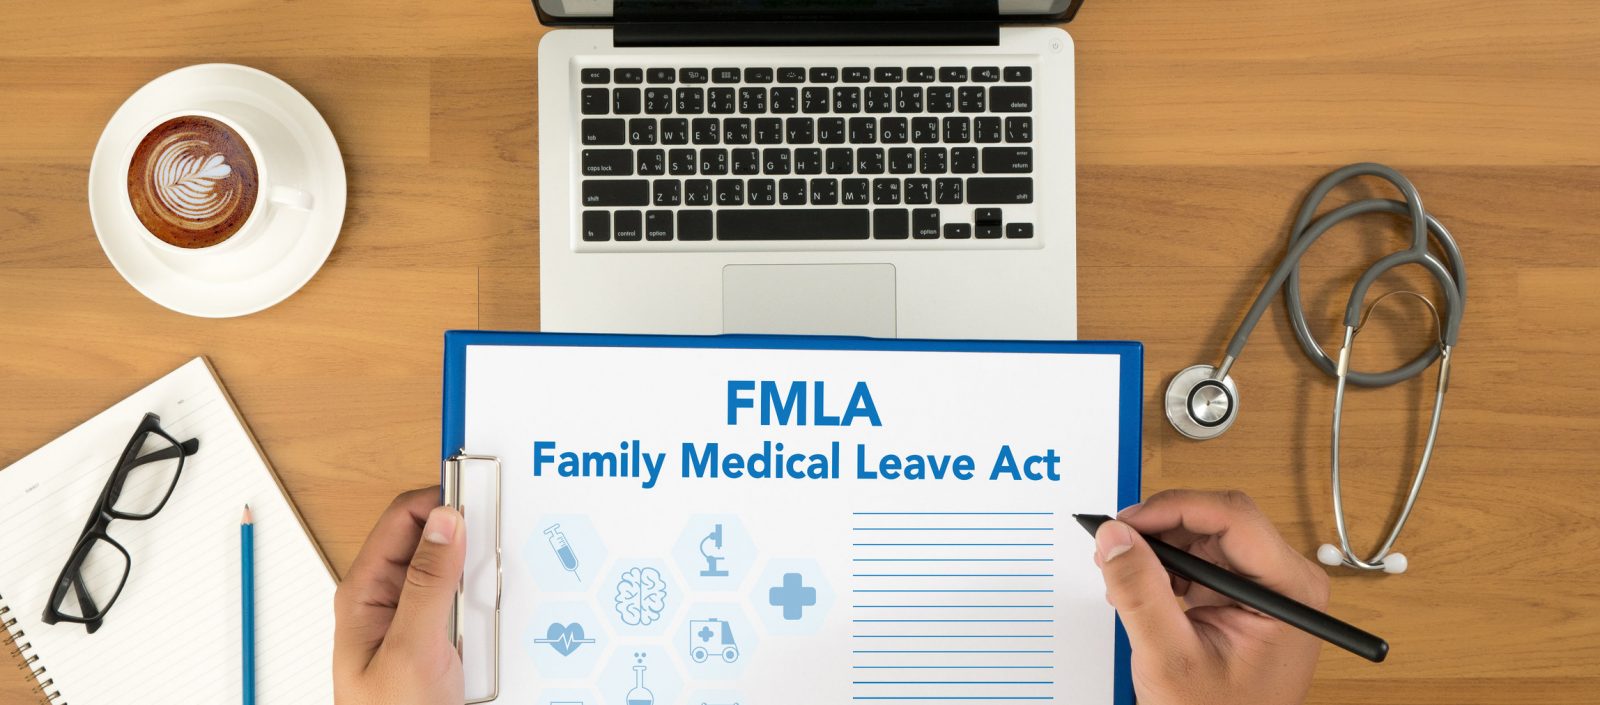 Quick information on setting FMLA leave policies as part of your employee attendance policy, including new military FMLA employee attendance rules.